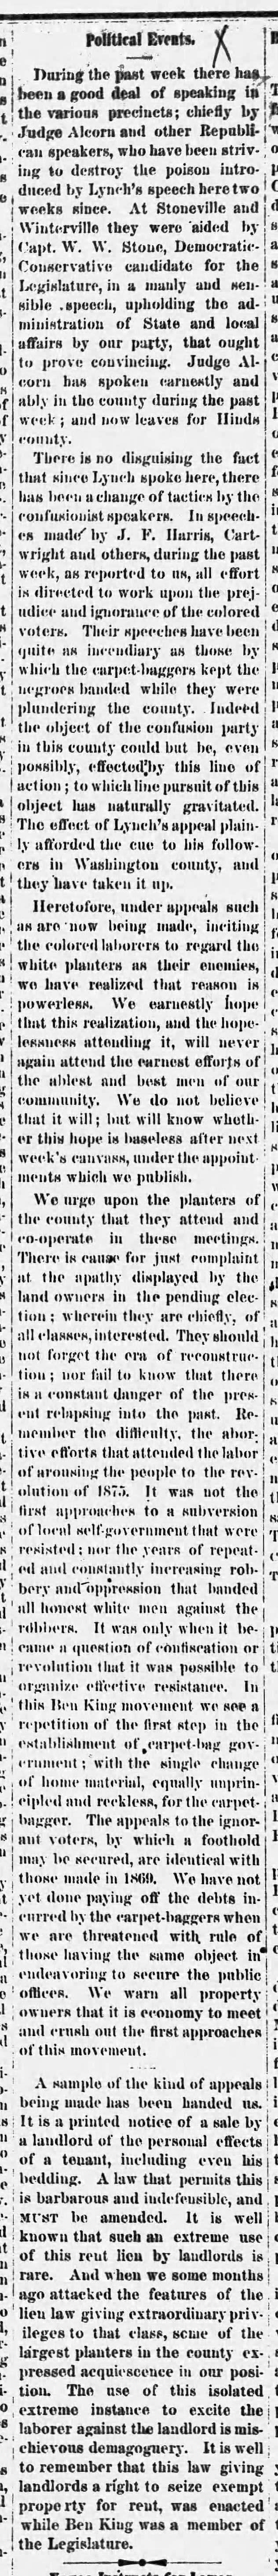 Political Events, The Weekly Democrat-Times (Greenville, Mississippi) October 29, 1881, page 2